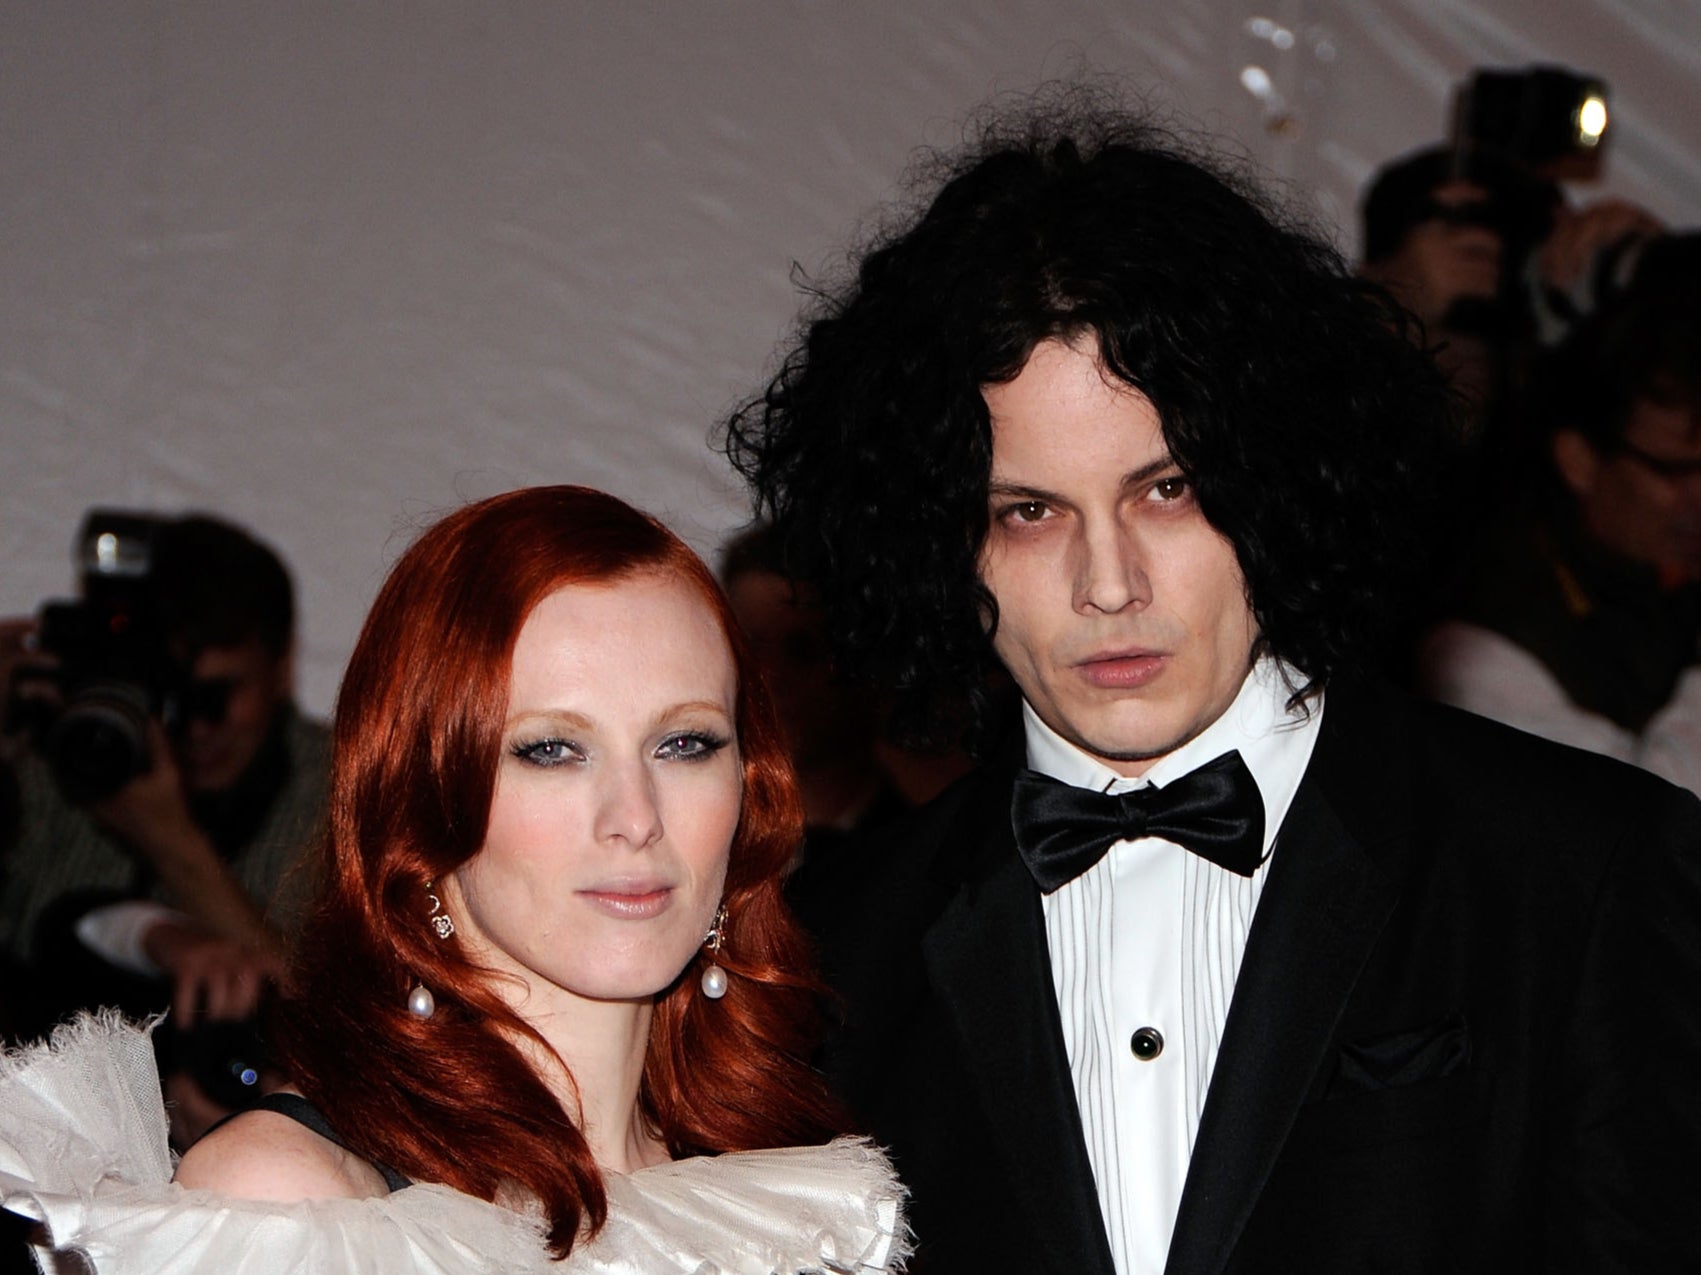 Karen Elson and Jack White at the Met Gala in 2009